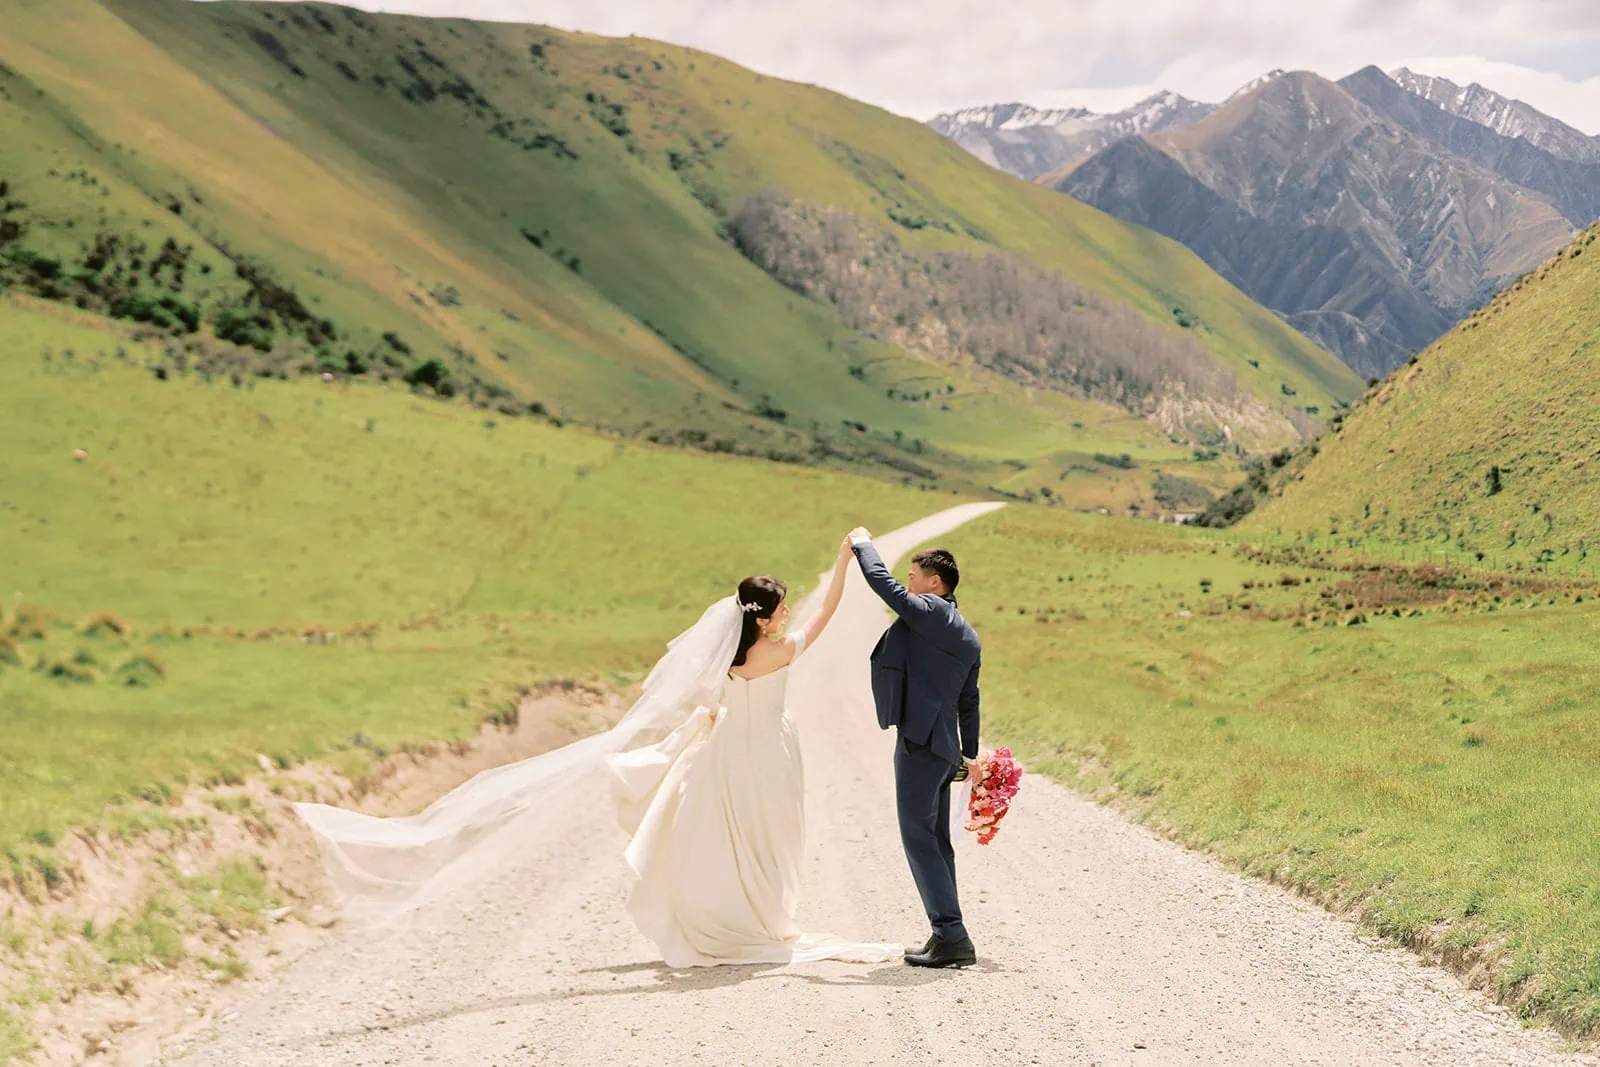 Queenstown Elopement Heli Wedding Photographer クイーンズタウン結婚式 | A bride and groom having their pre-wedding photoshoot on a dirt road in the mountains.